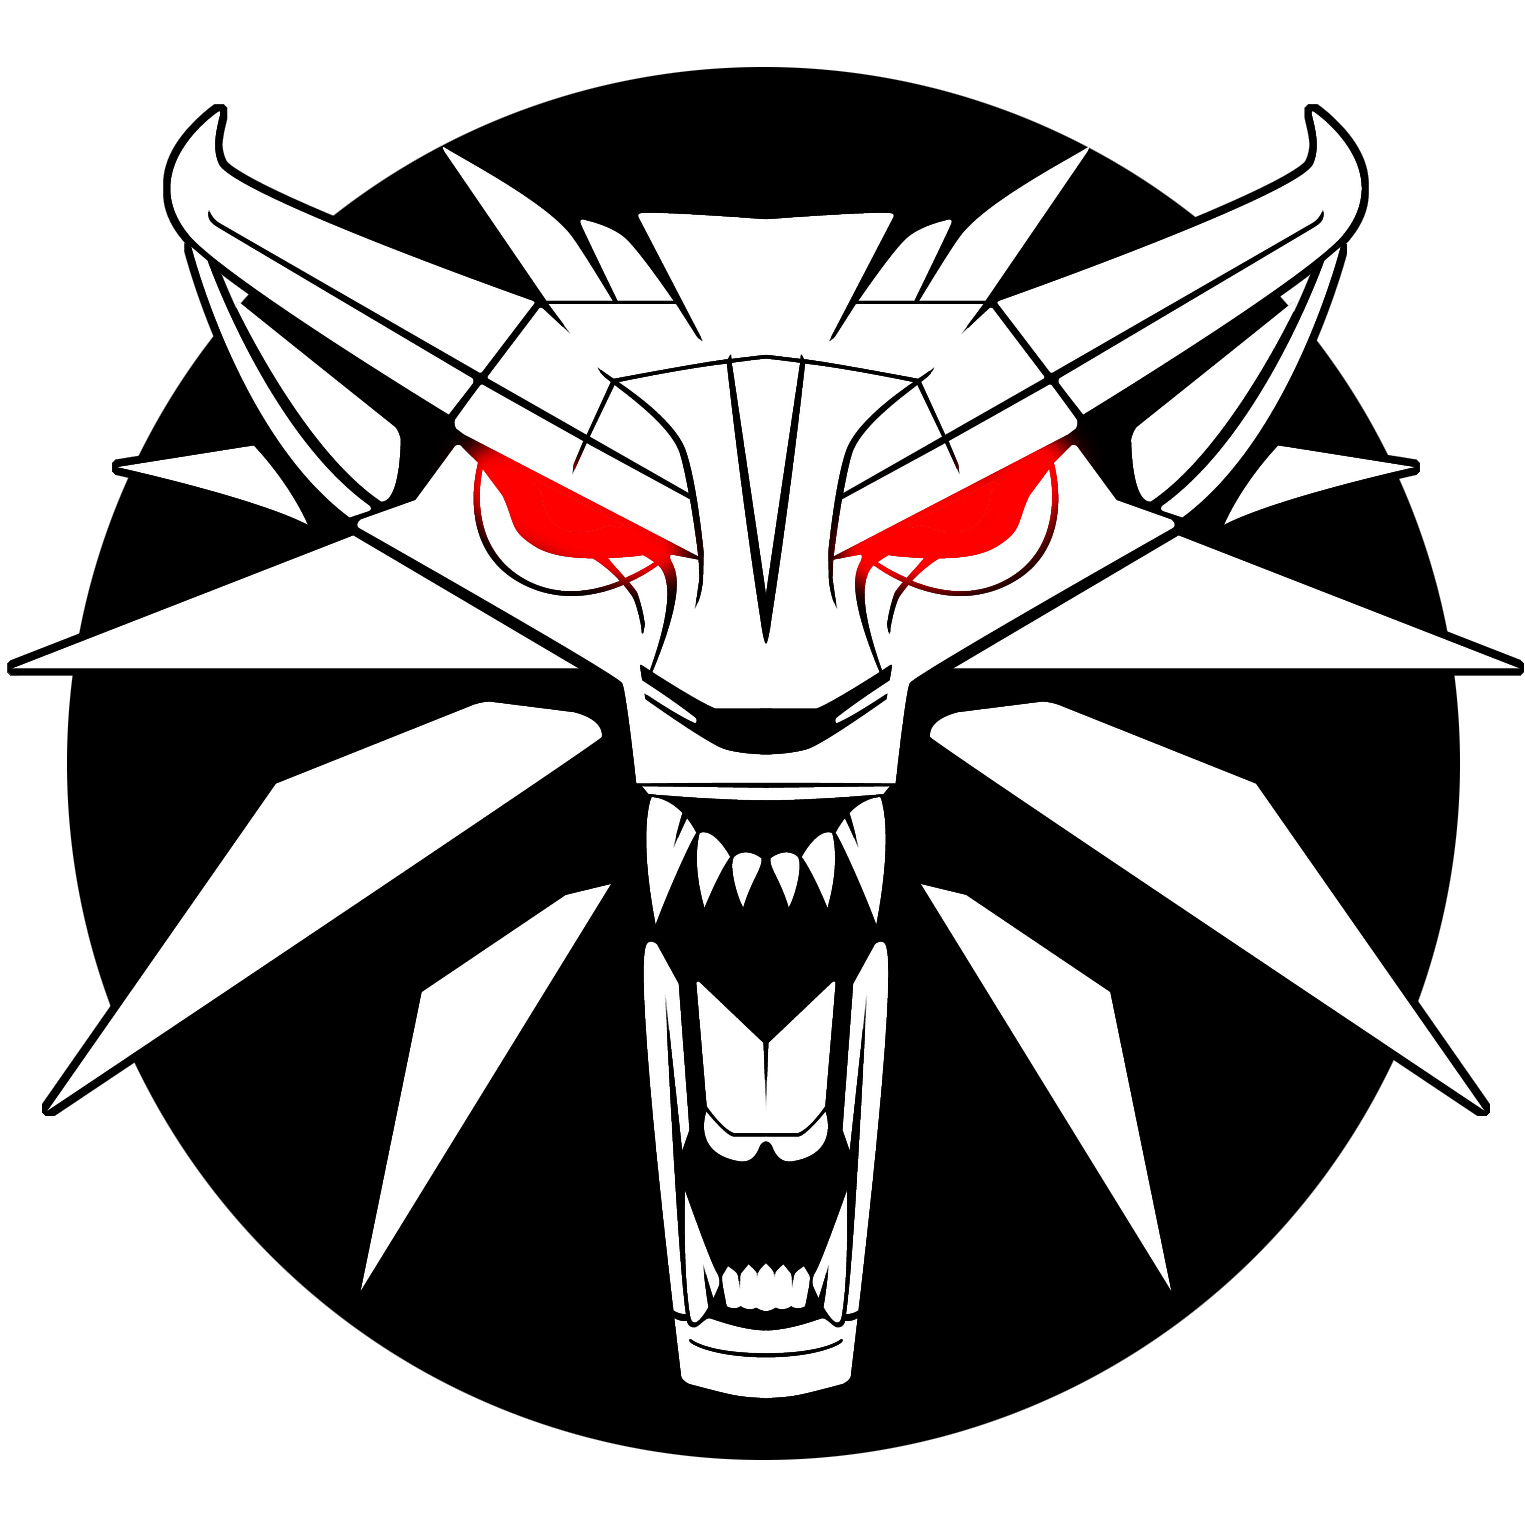 Witcher Logo - The Witcher Logo PNG Image. Free transparent CC0 PNG